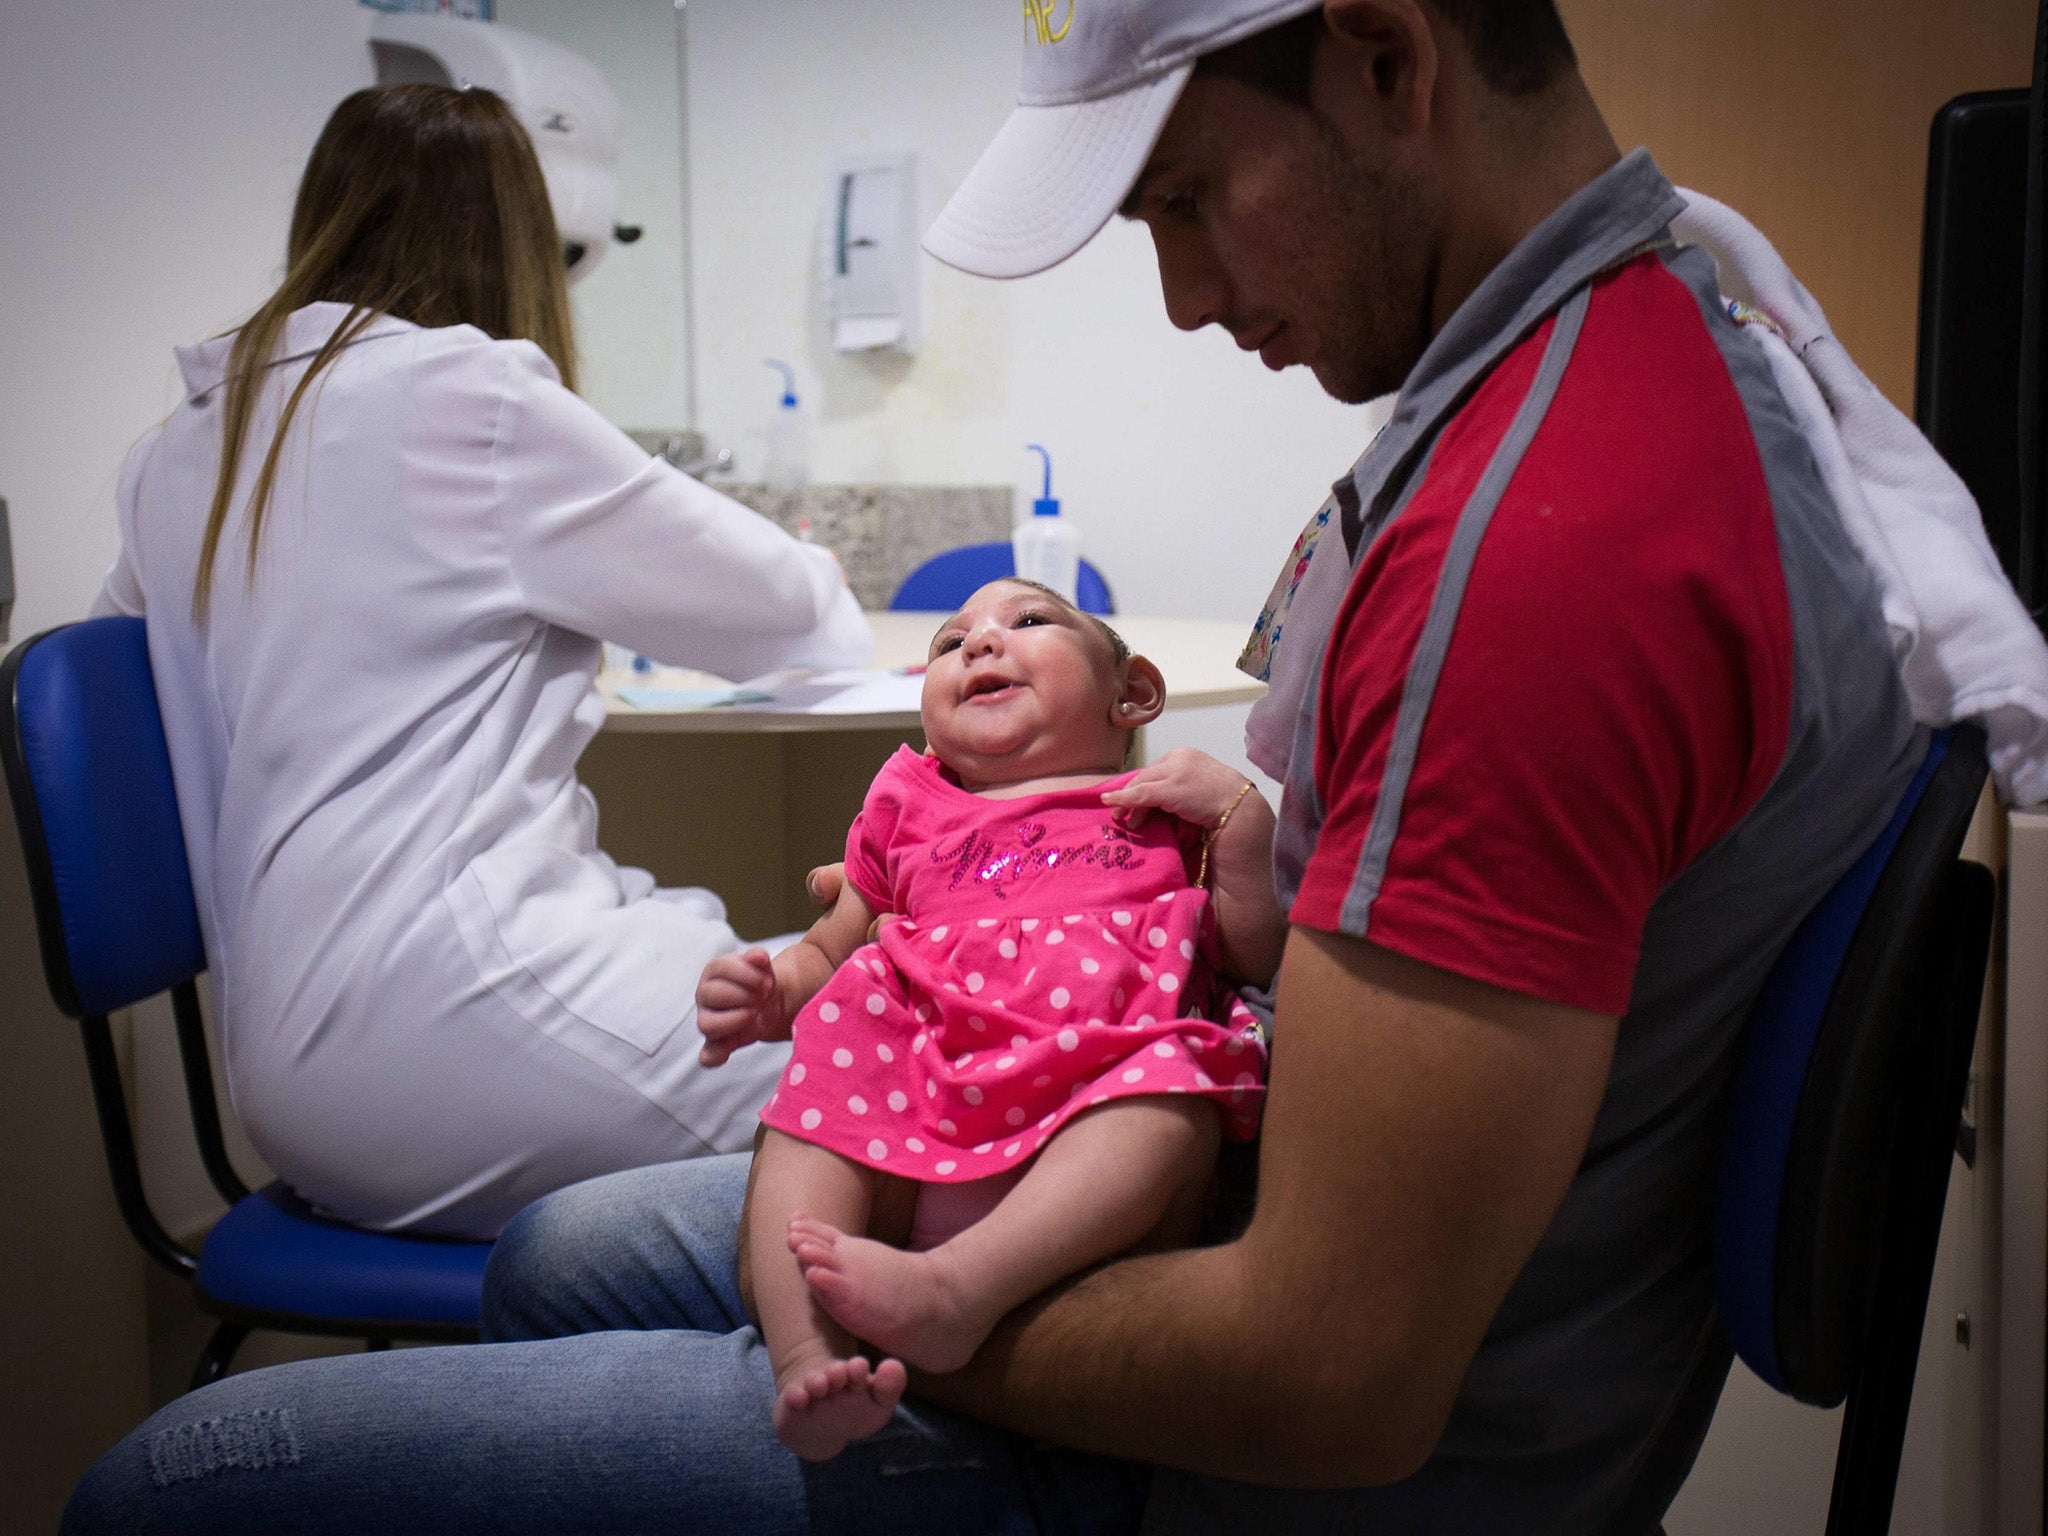 Ana Beatriz is held by her father Alipio Martin during a medical appointment at the Altino Ventura Foundation in Recife, Brazil